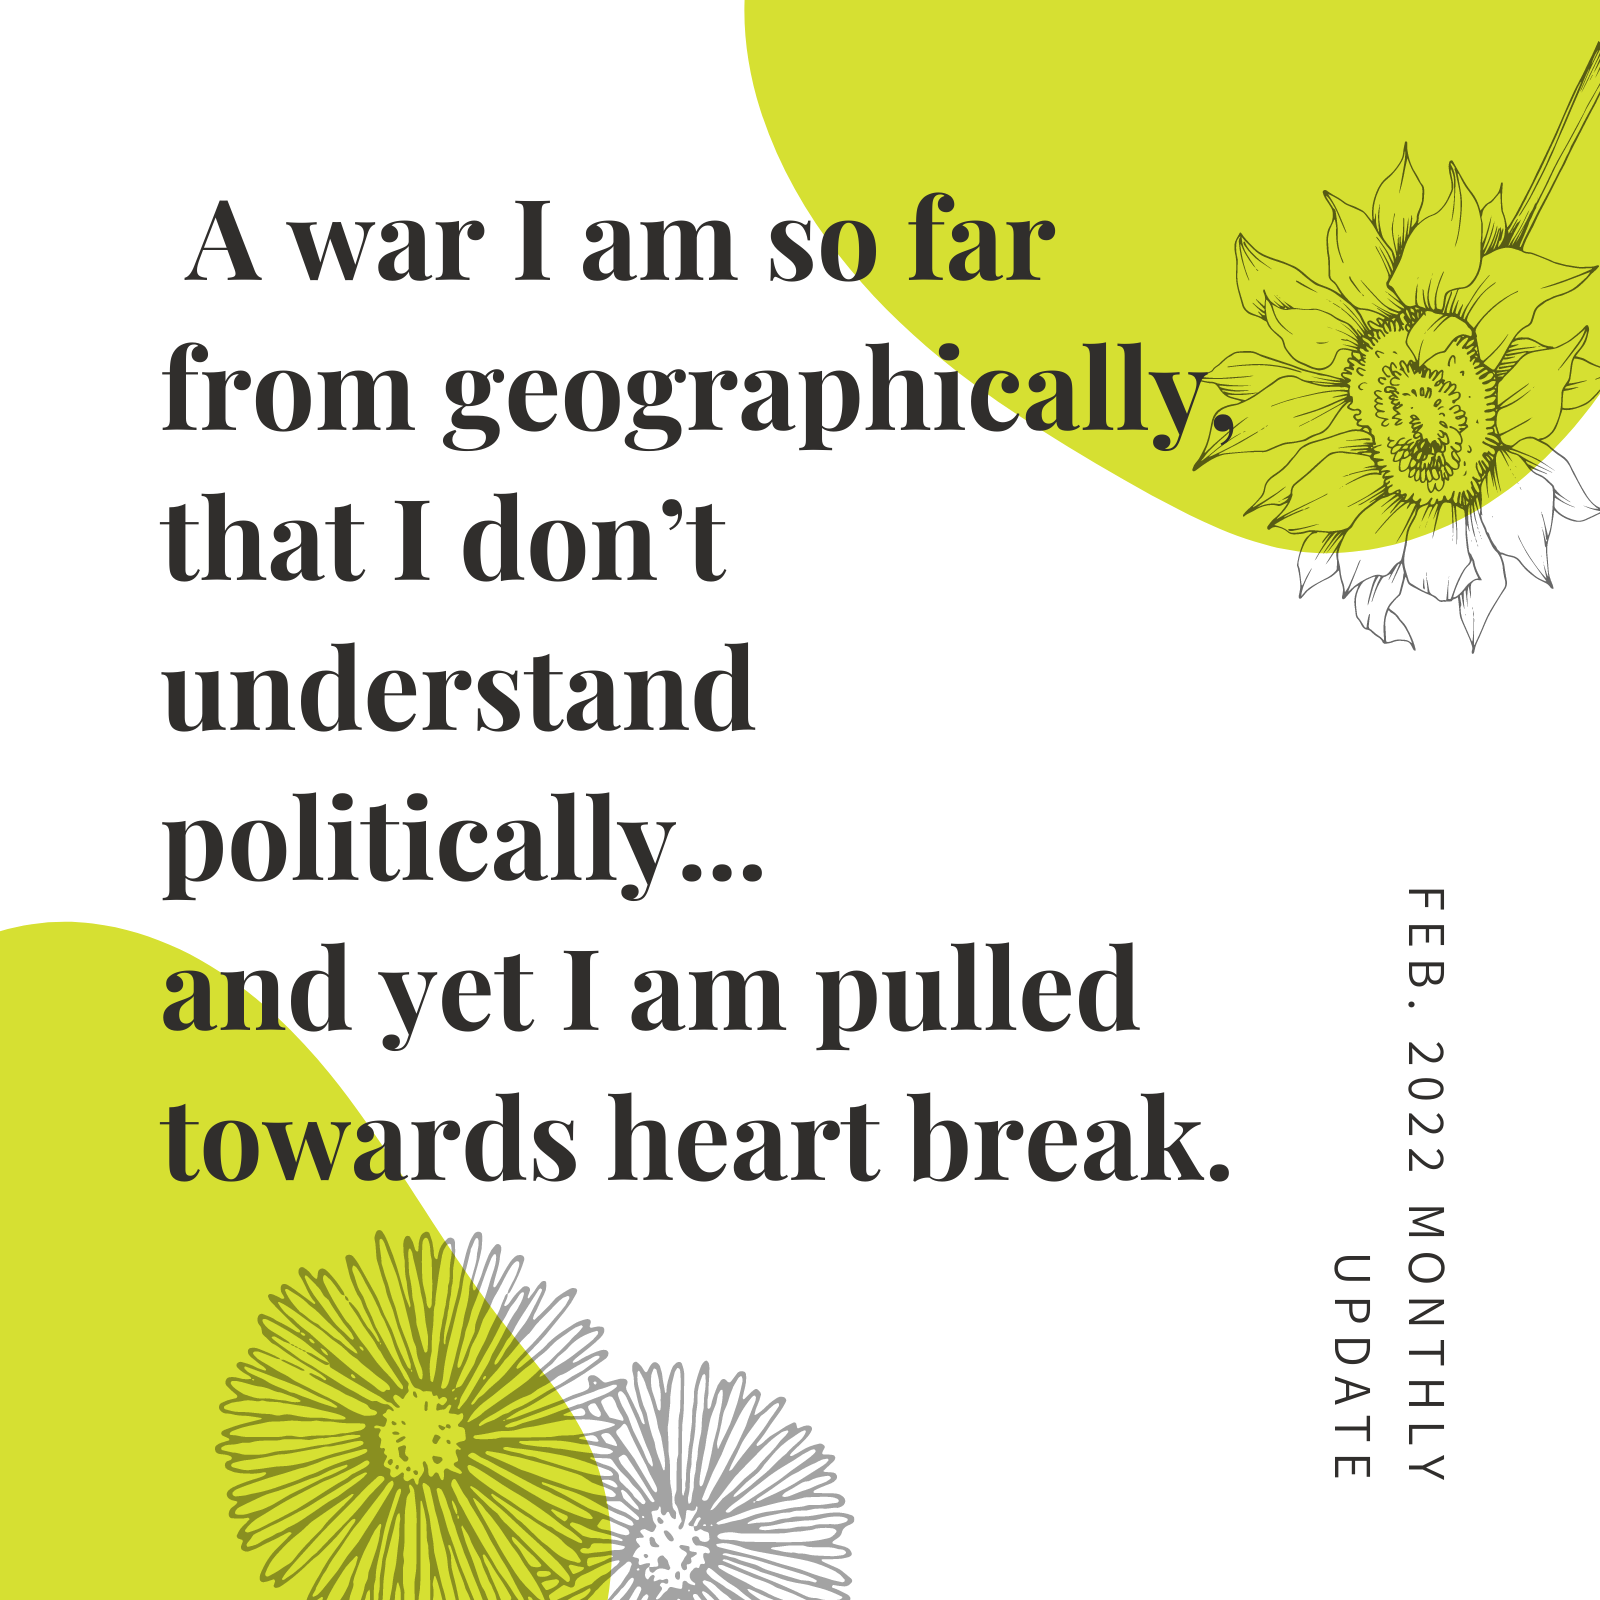 A war I am so far from geographically, that I don't understand politically... and yet I am pulled towards heartbreak